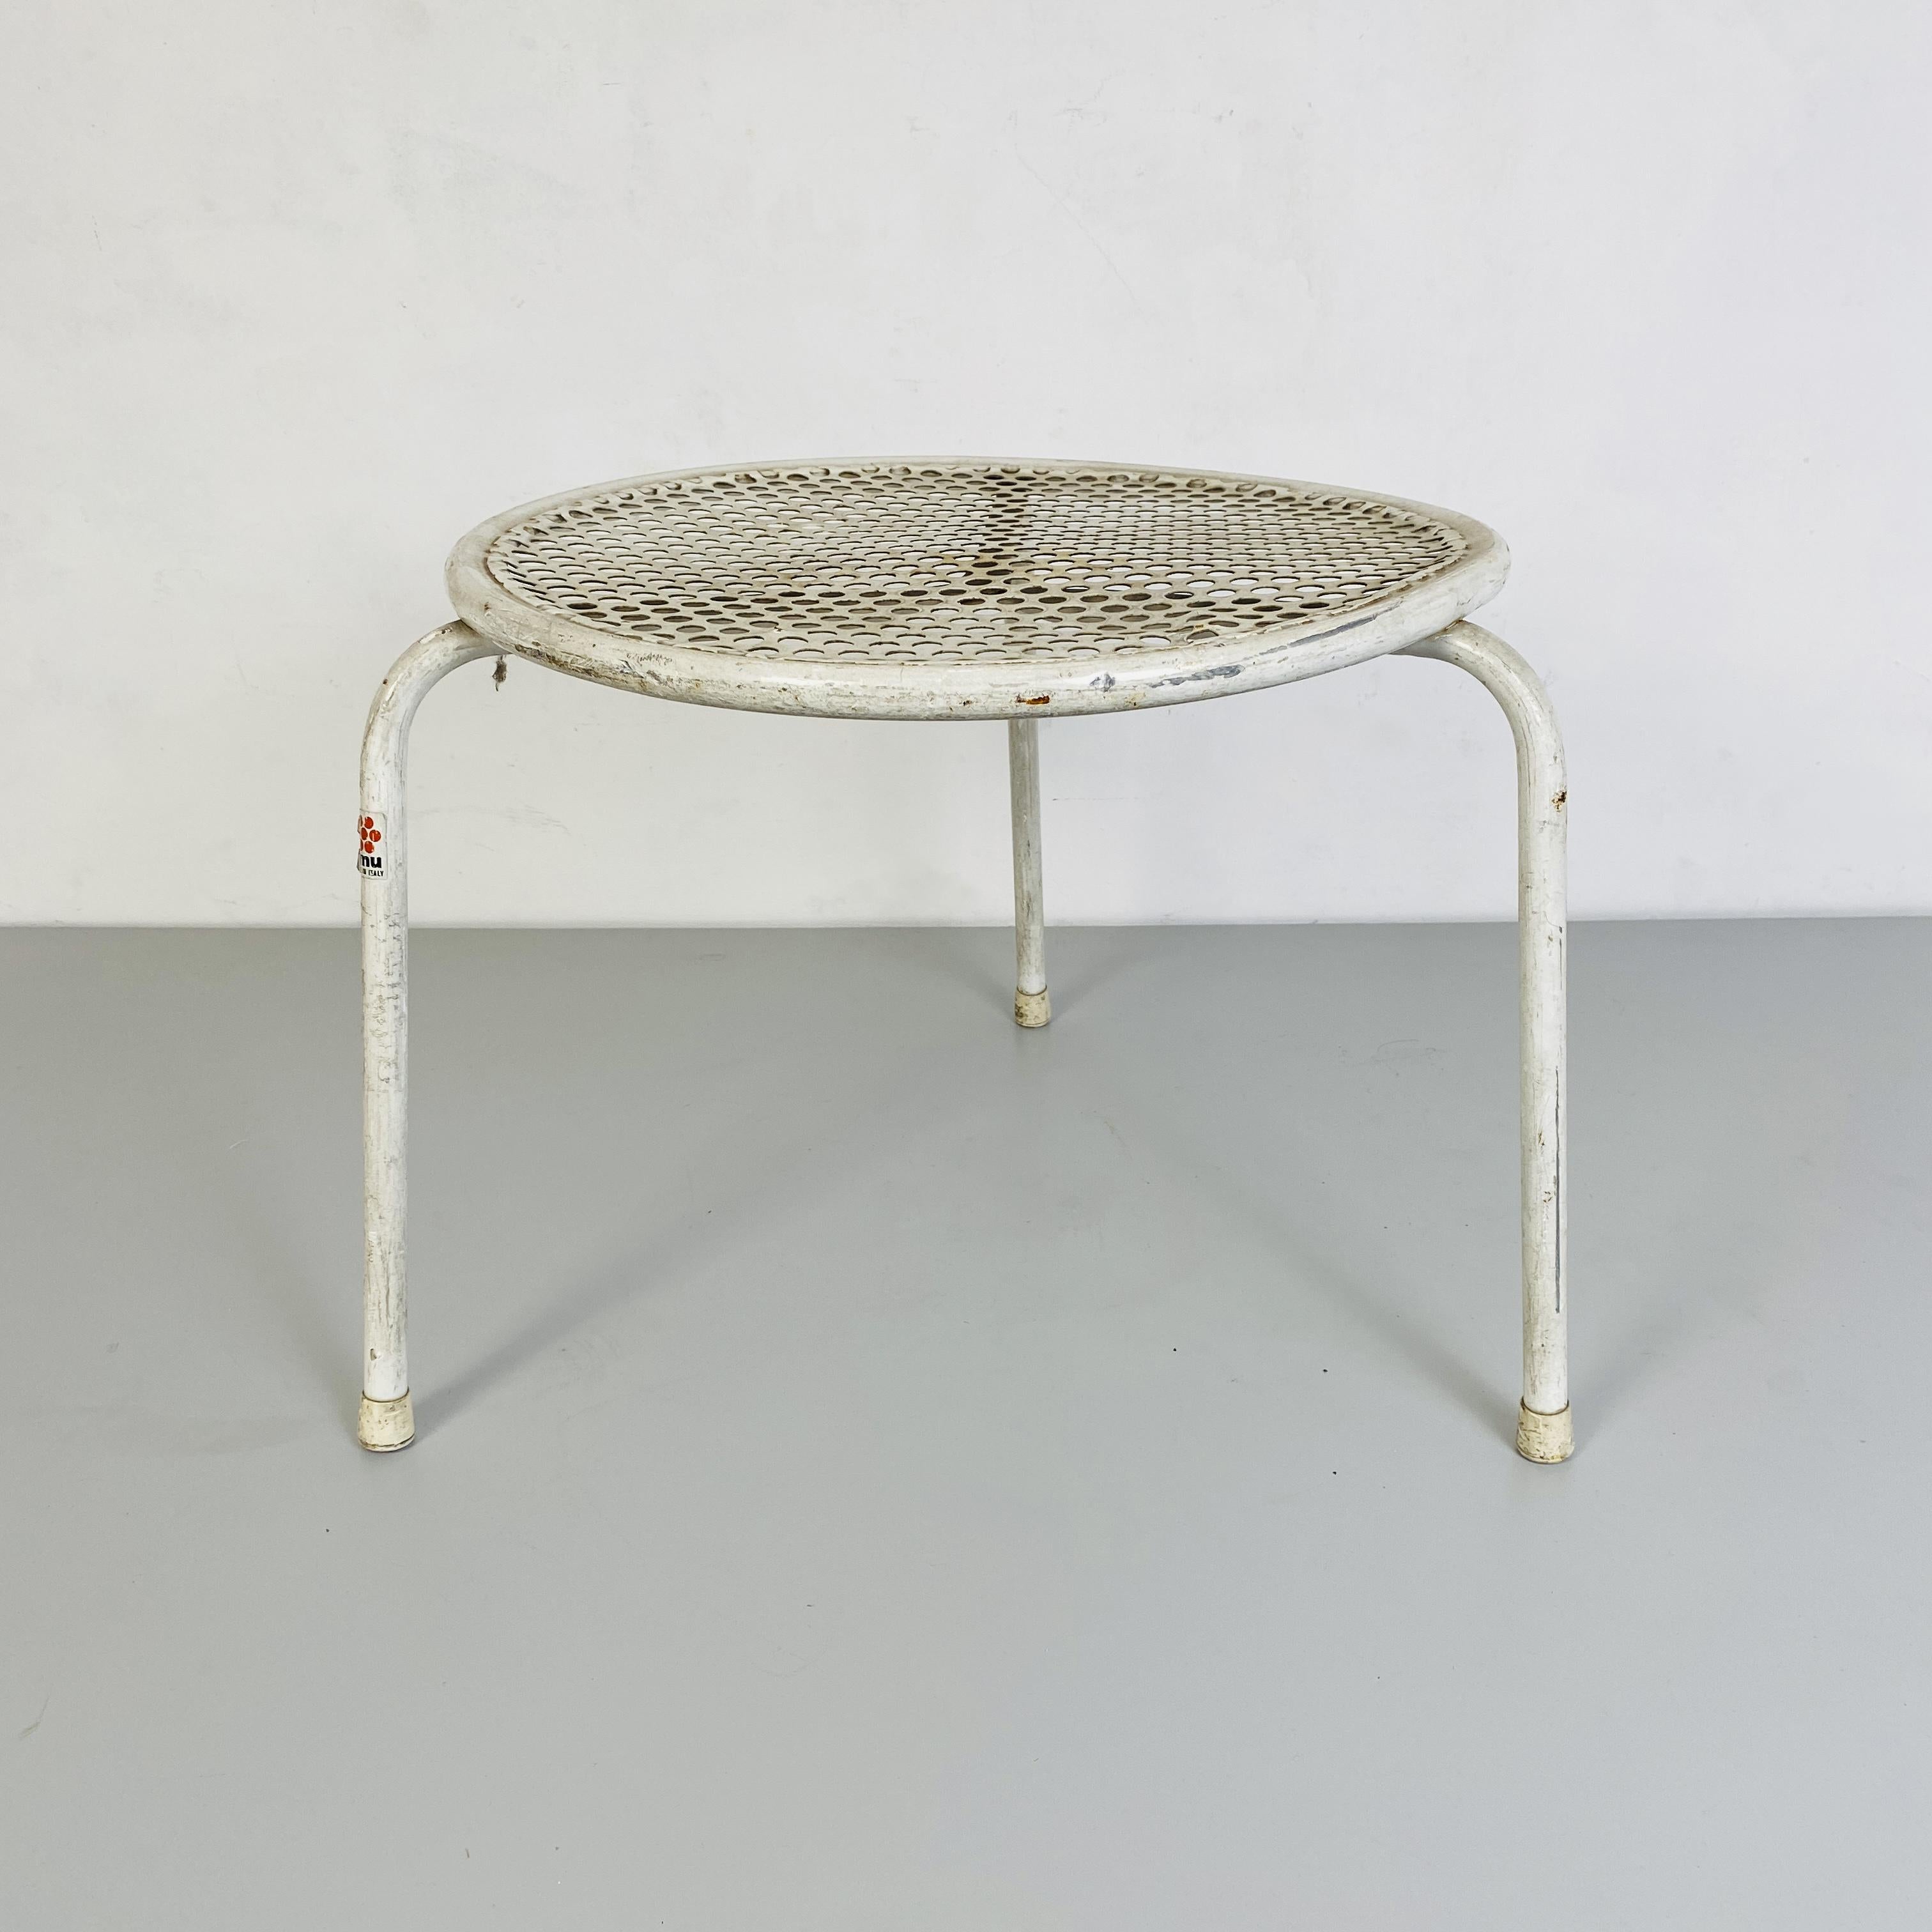 Italian Mid-Century Modern Perforated Metal Outdoor Table by Emu, 1960s For Sale 1